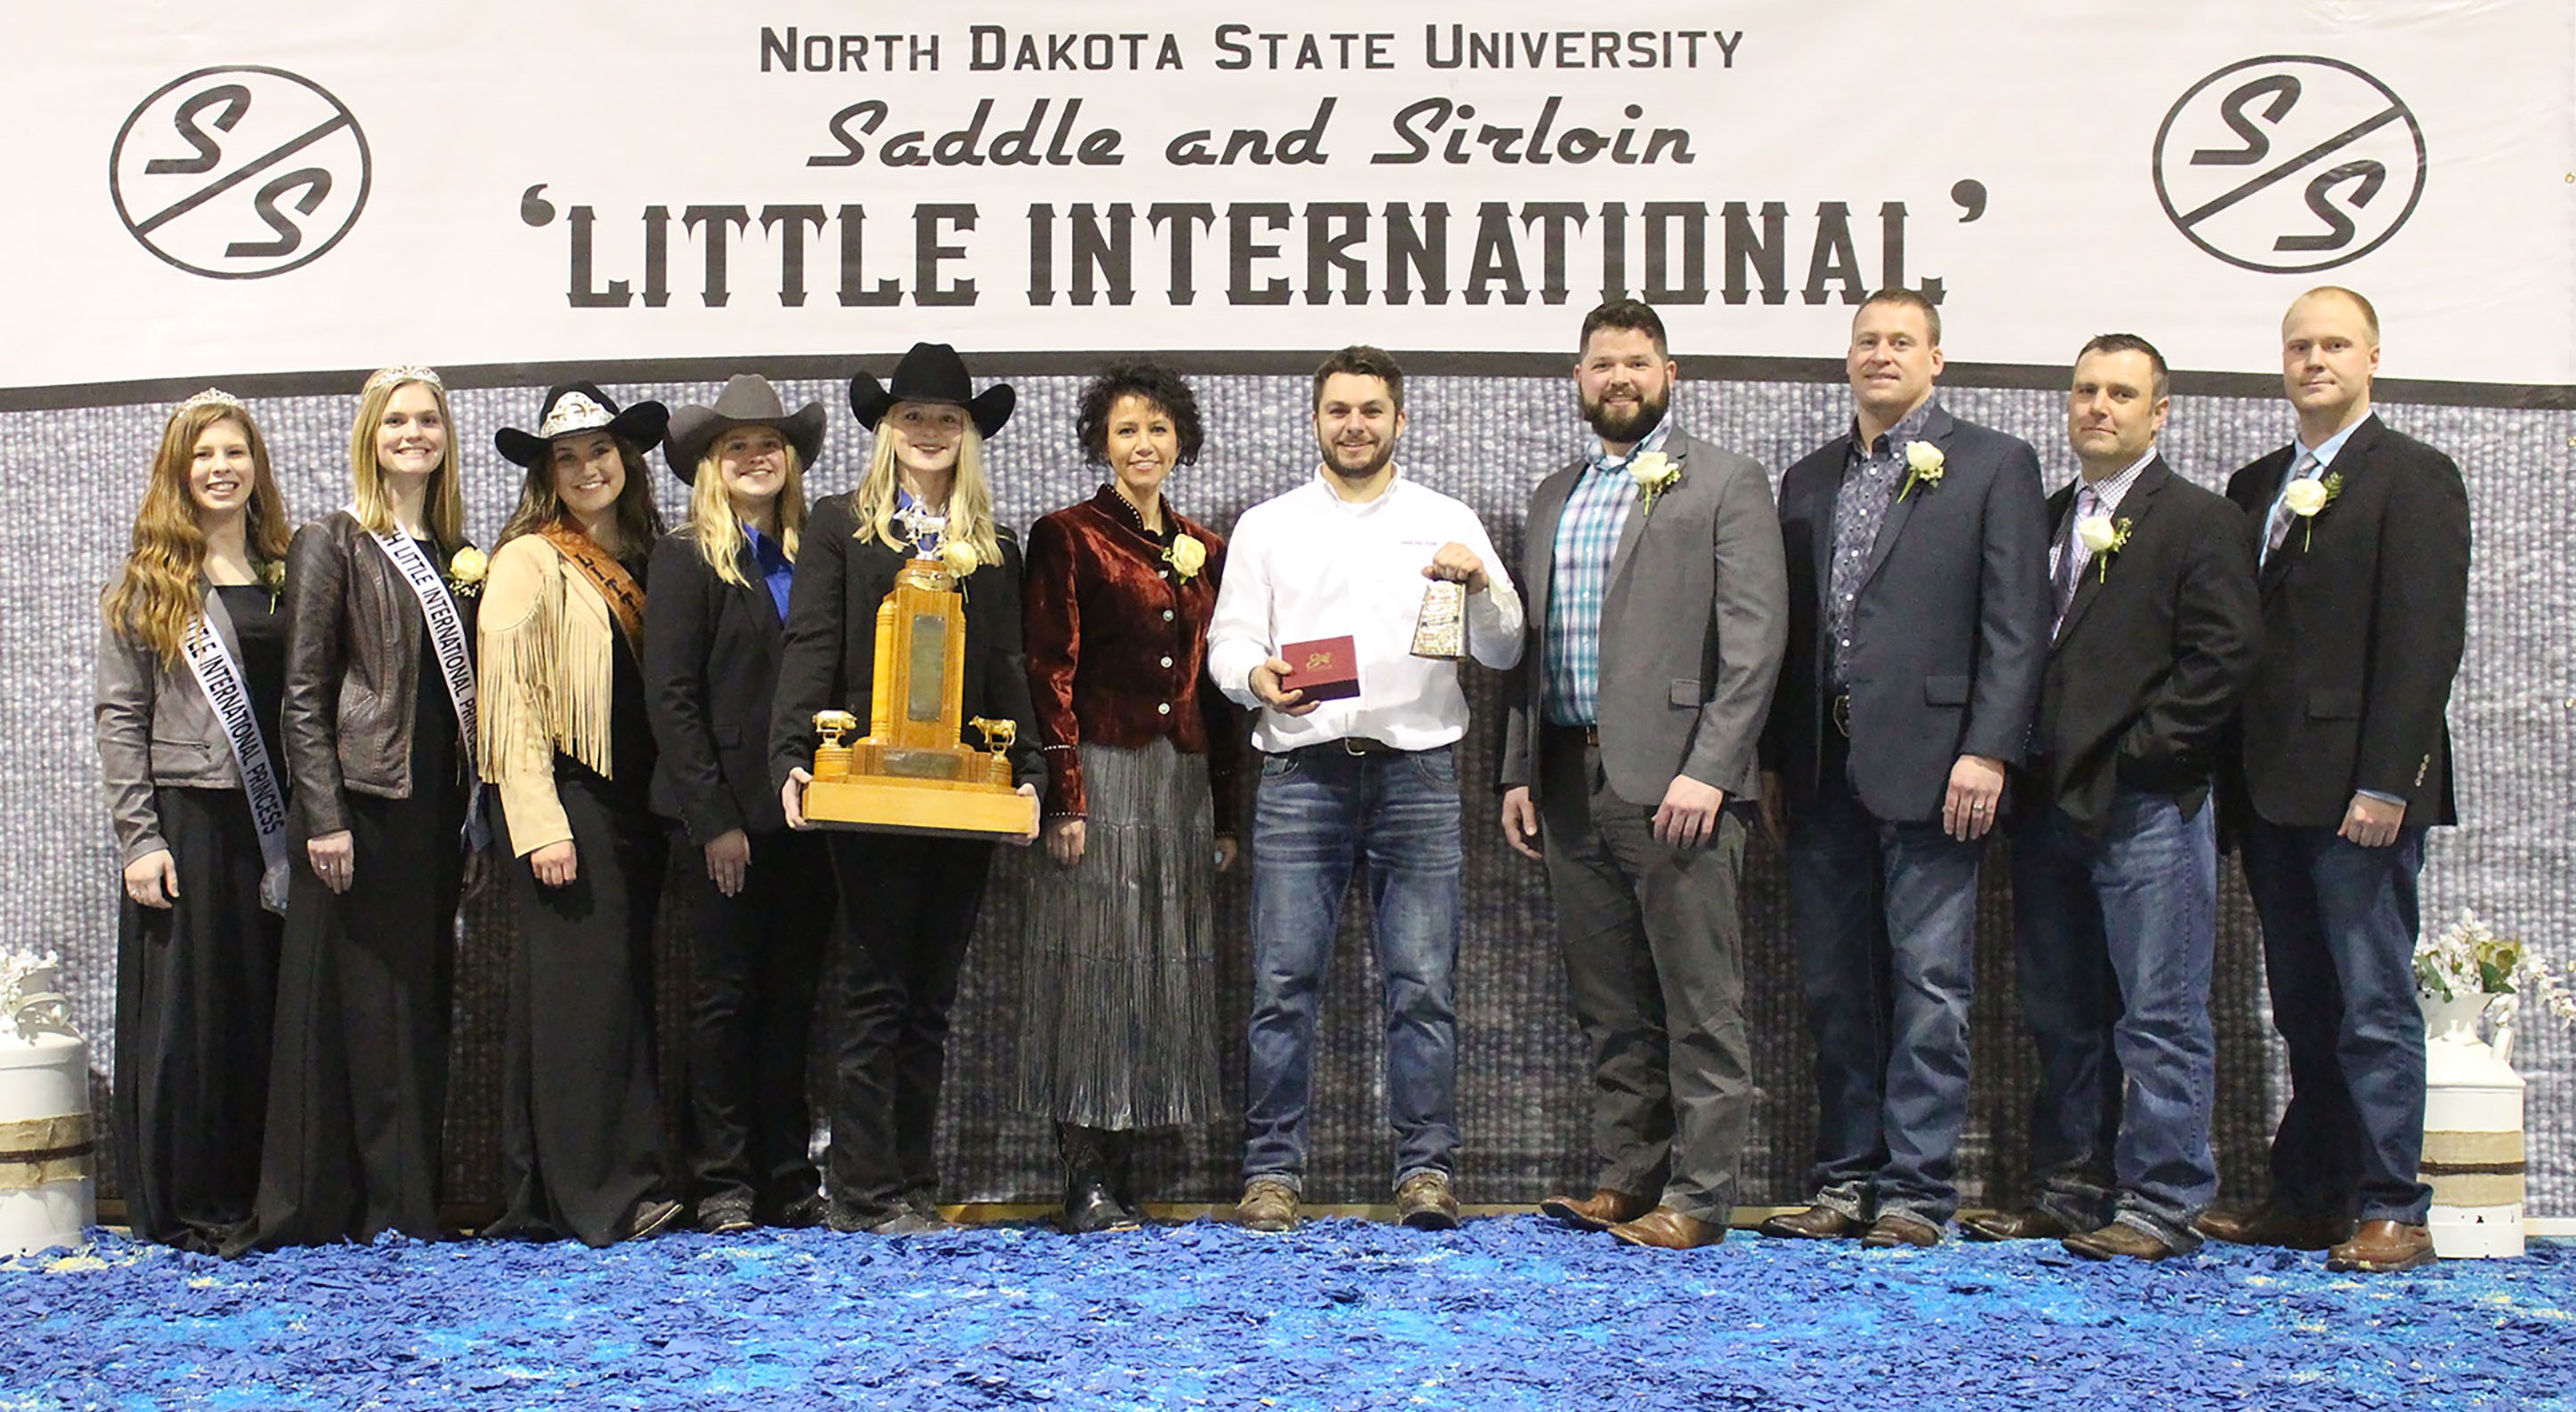 Mitch Molitor, a senior in agricultural economics from Watkins, Minn., was named the overall showman at the 95th Little International at North Dakota State University Feb. 13. Pictured L to R: Maddie Patterson and Annabelle Hardwick, Little I Princesses; Samantha Pernsteiner, Little I Queen; Ashlyn Dilley, Little I Assistant Manager; Kadey Holm, Little I Manager; Julie Ellingson, Little I Agriculturist of the Year; Molitor; Cole Rupprecht, Dairy judge; Ben Hawkins, Cattle judge; Jeremy Lehrman, Swine judge; and Isaiah Bauck, Sheep judge. (NDSU photo)